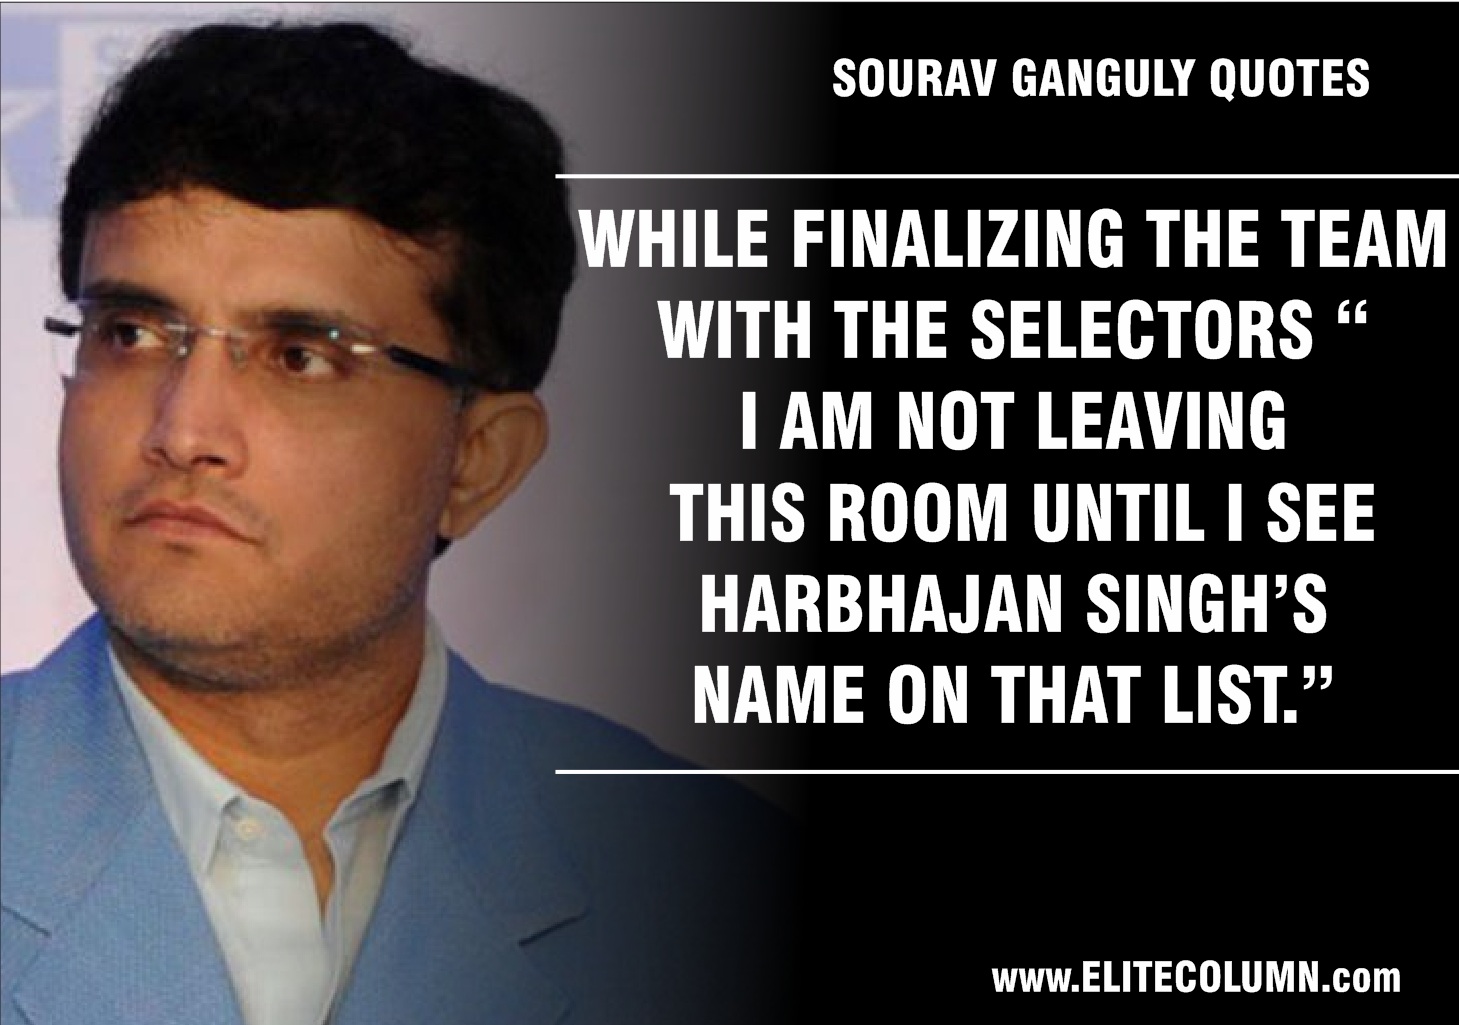 Sourav Ganguly Quotes (11)